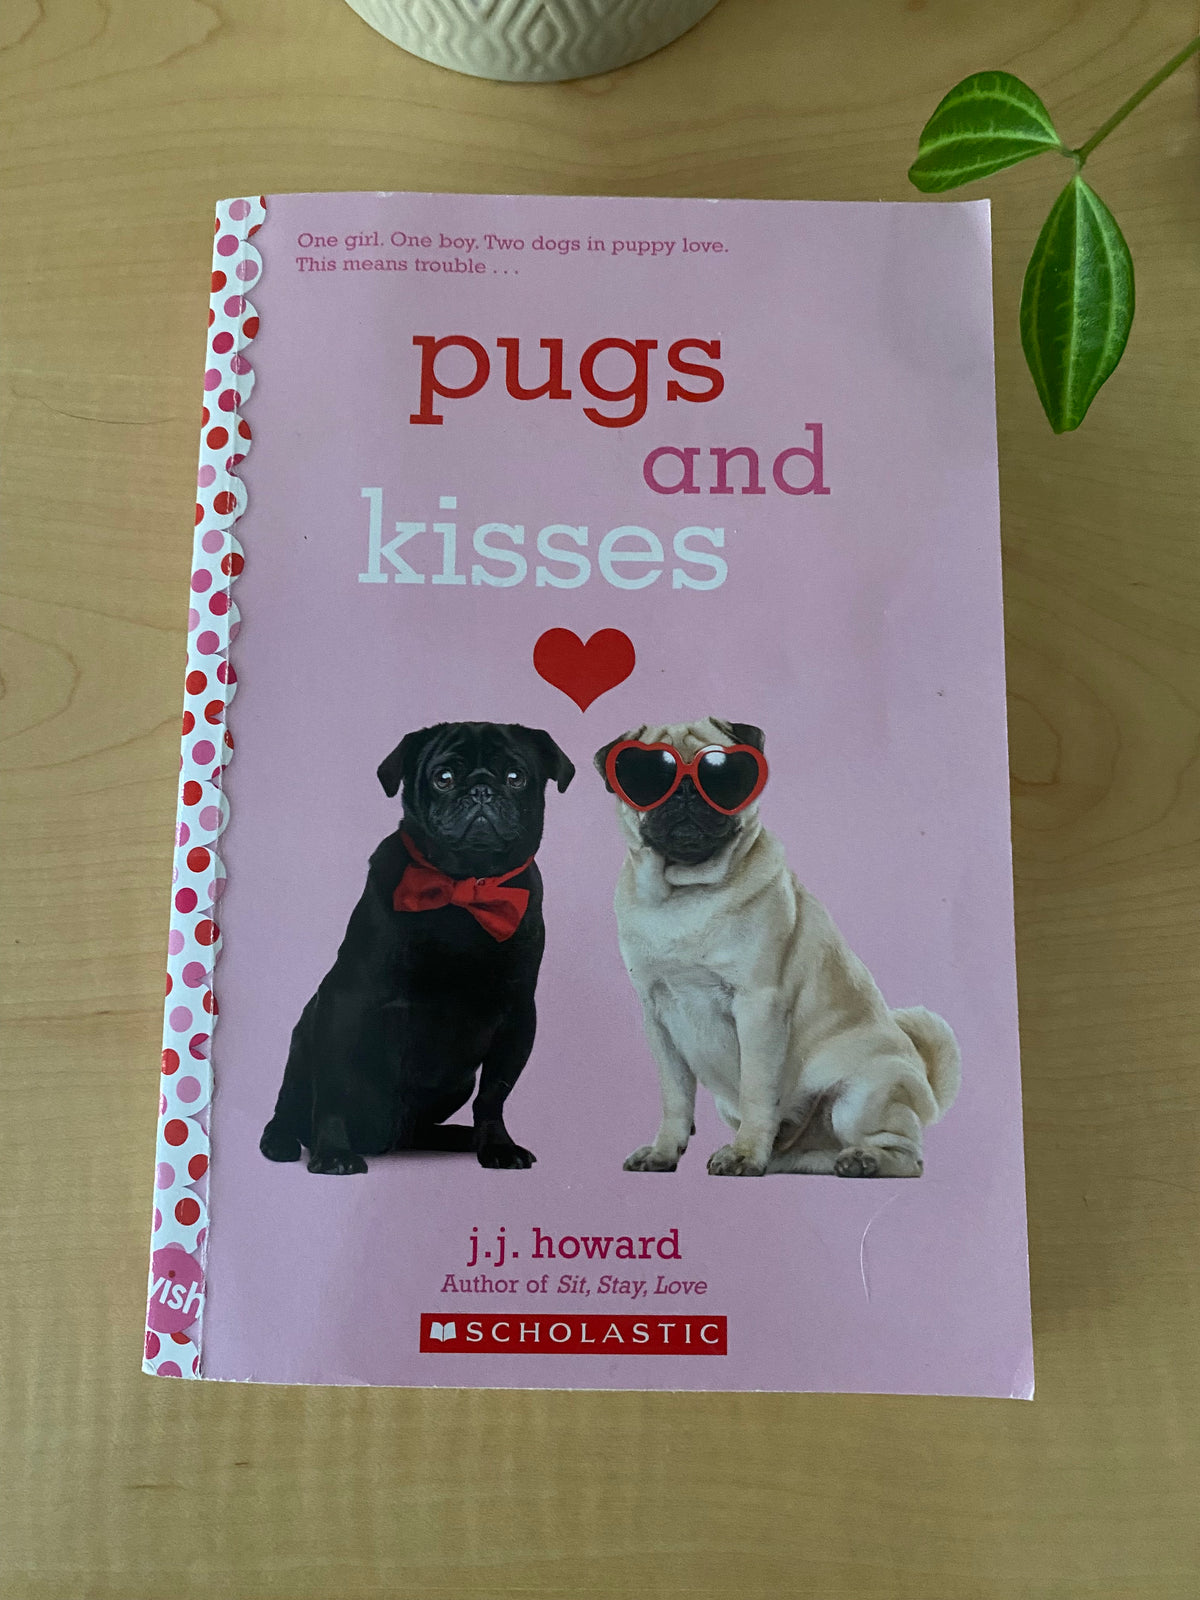 Book - Pugs and Kisses